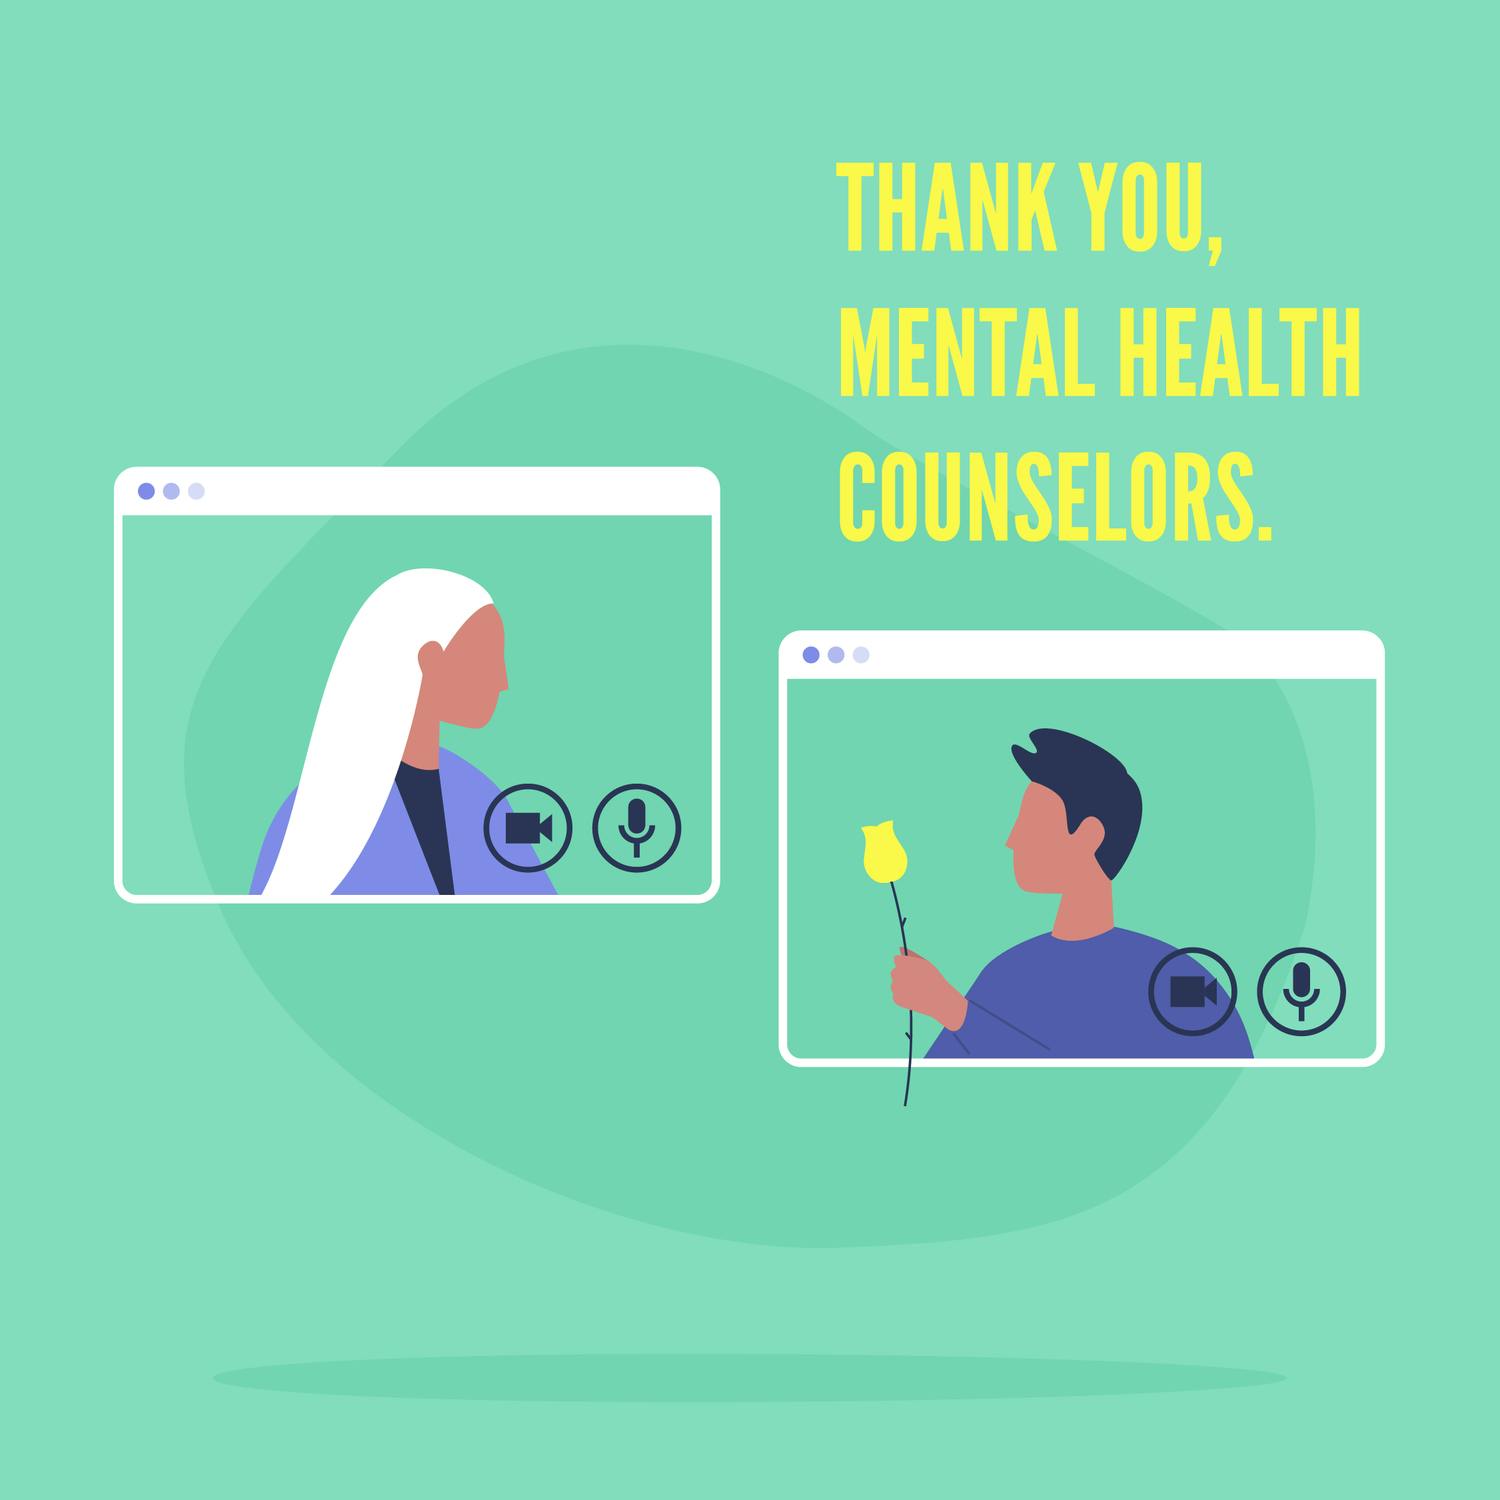 Thank you mental health counselors